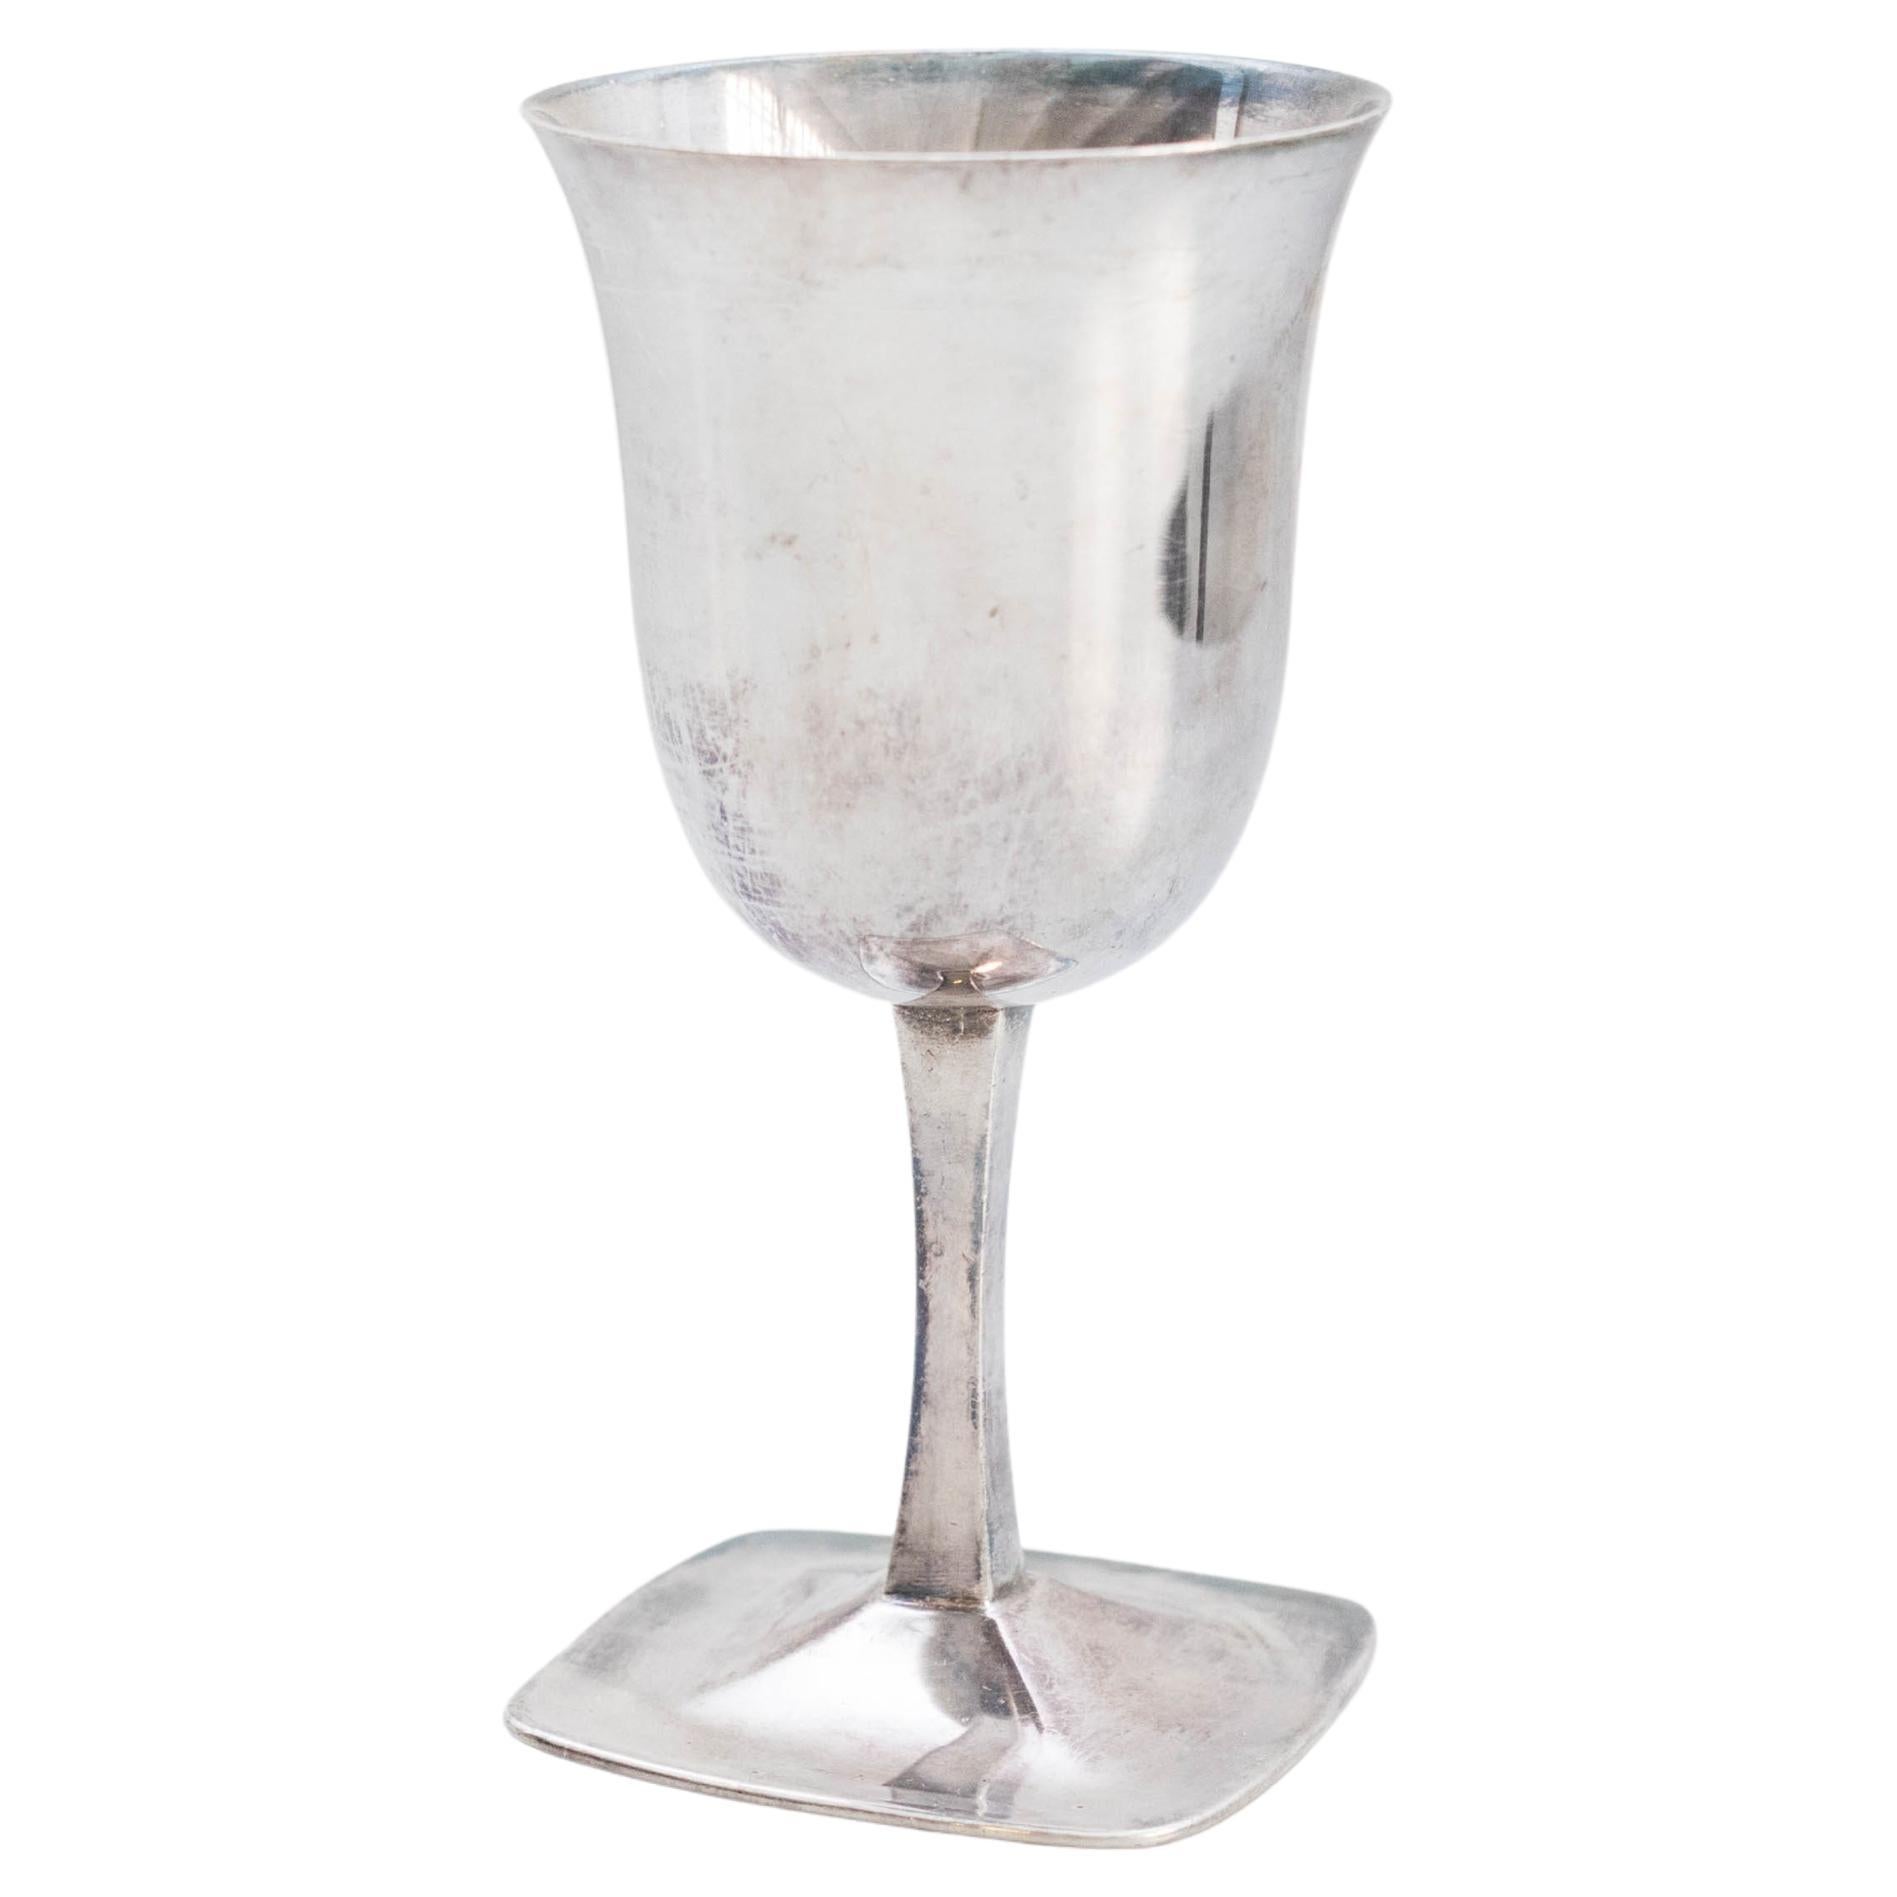 Early 20th Century Chalice